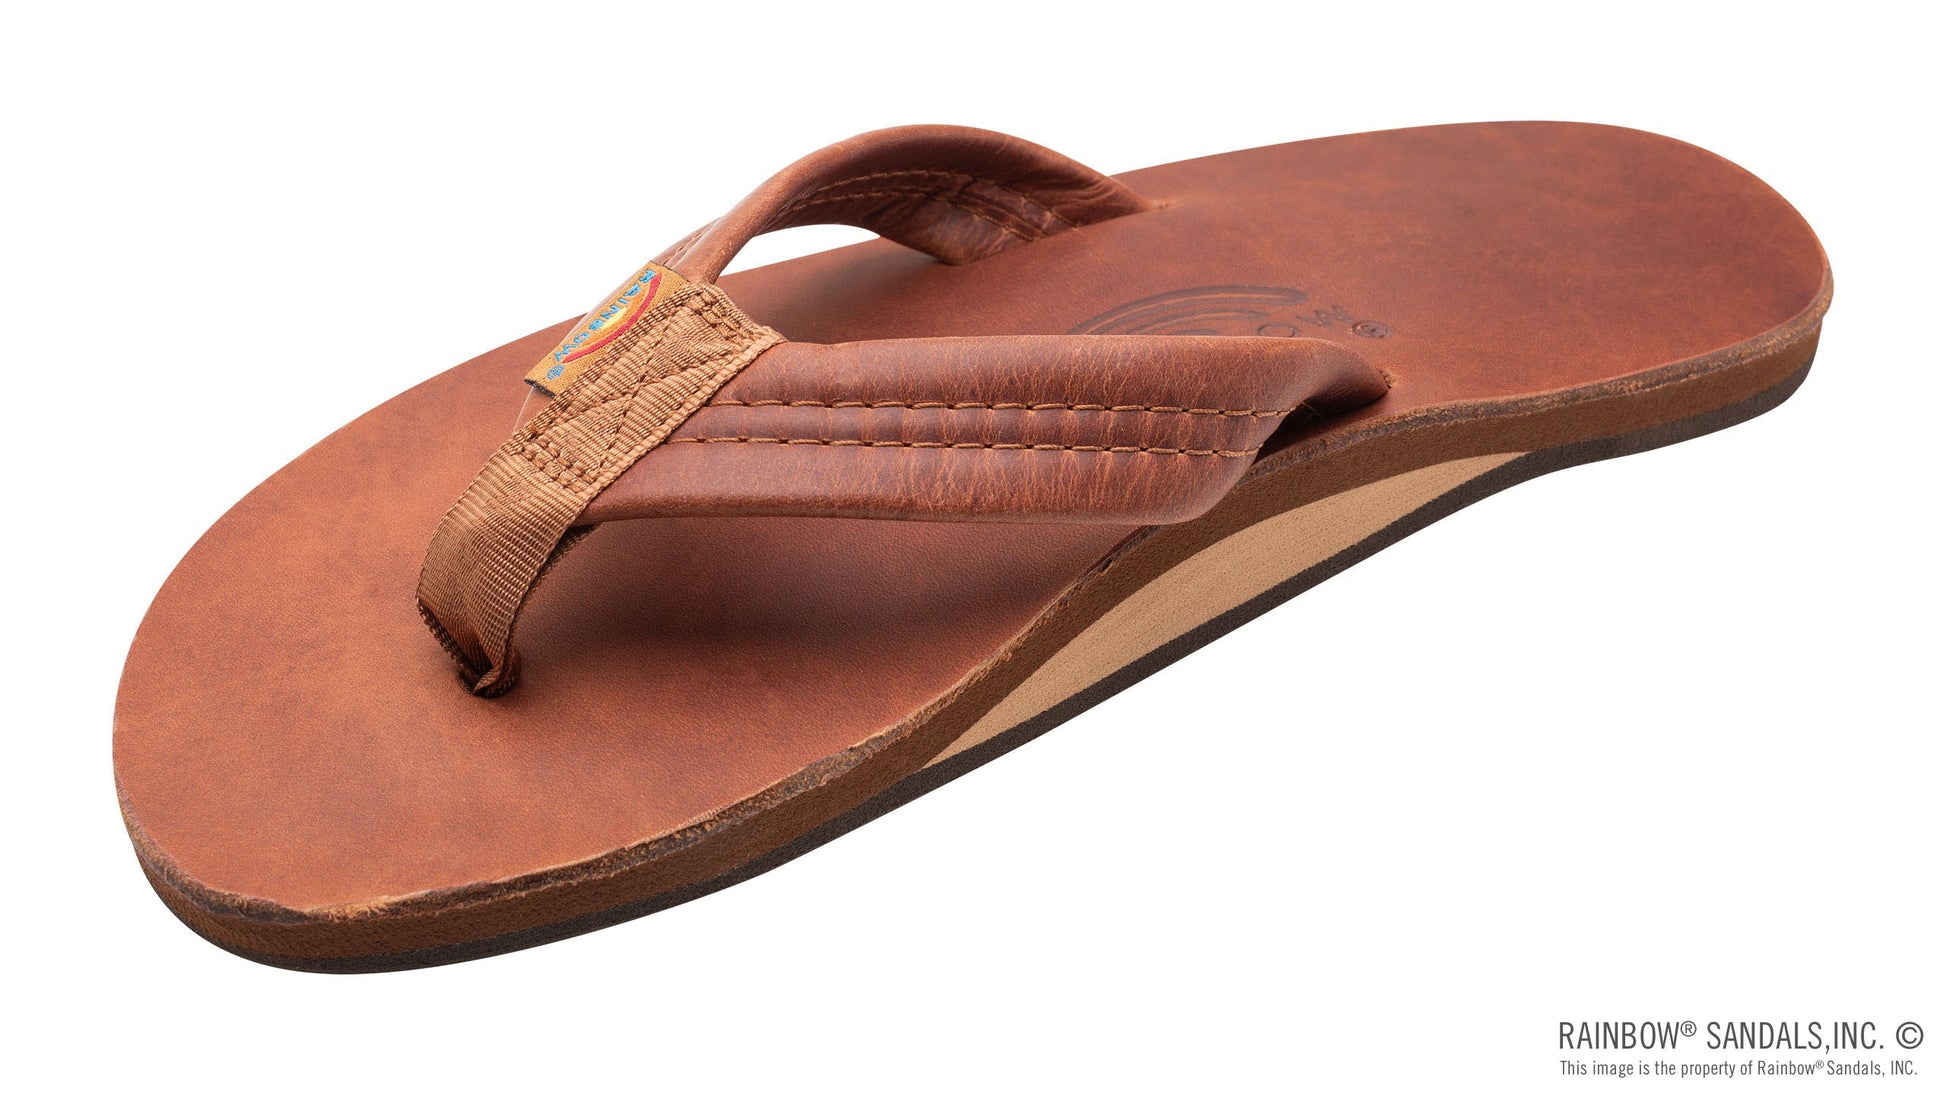 Single Layer Classic Leather with Arch Support 1" Strap Sandal The Bikini Shoppe